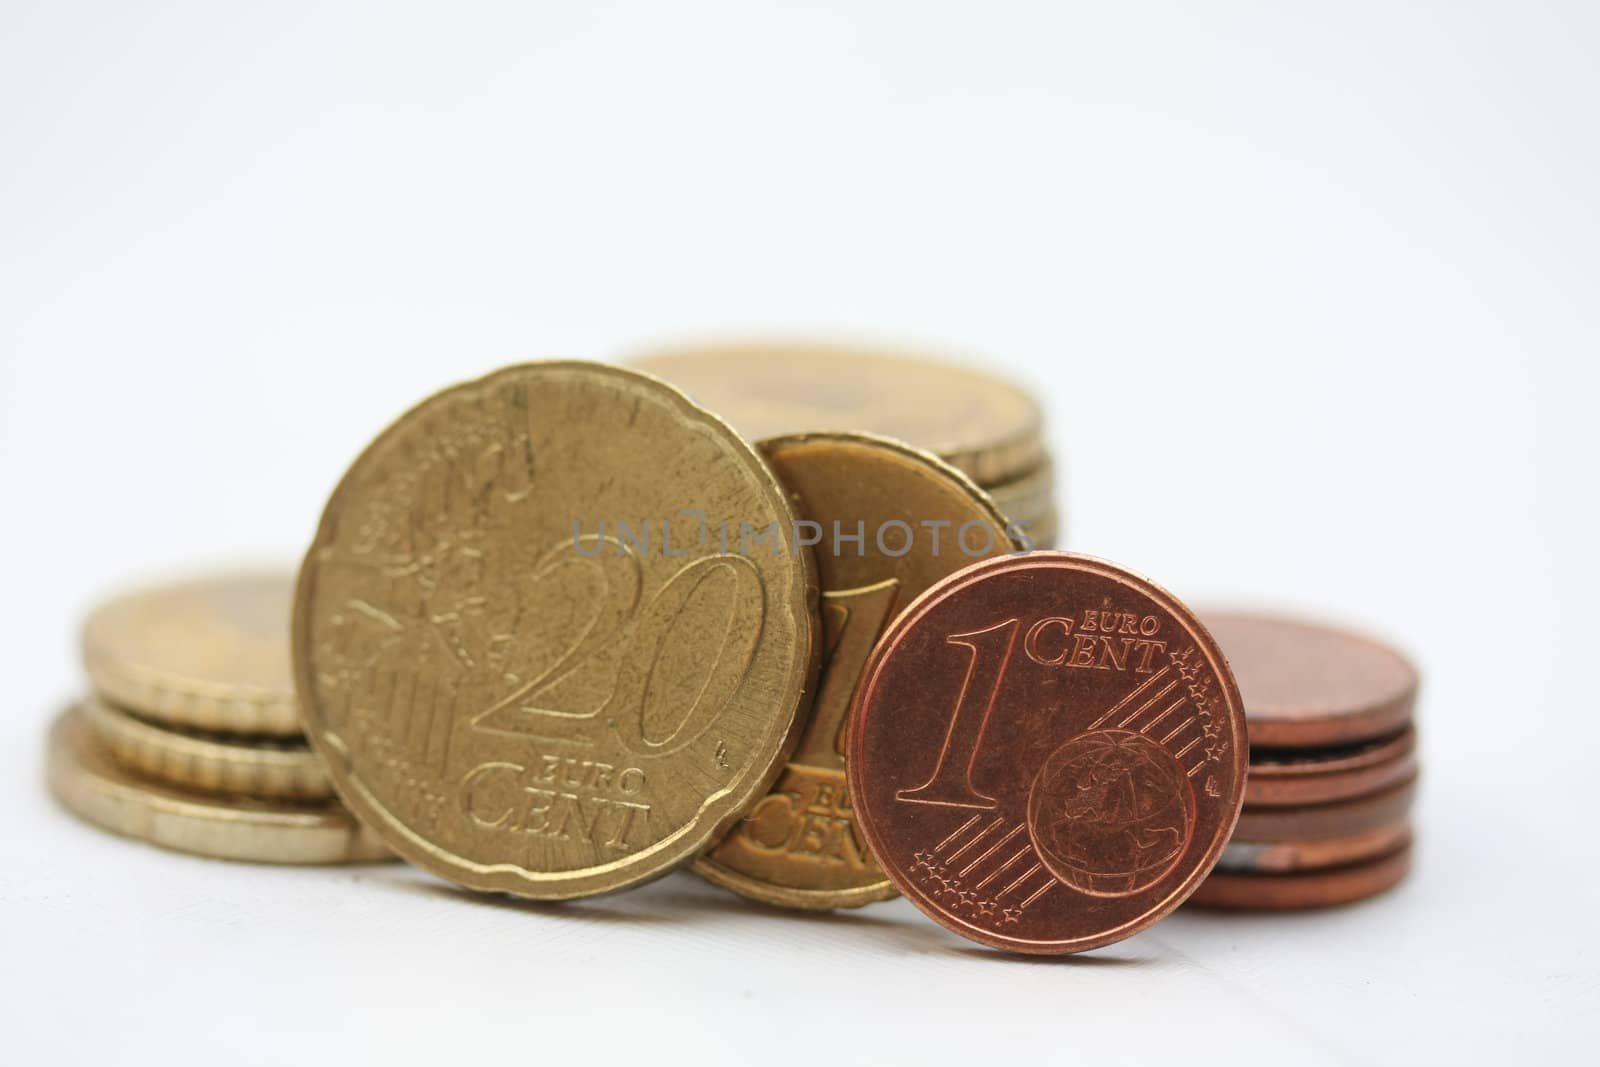 2011 in euro coins - happy new year by studioportosabbia